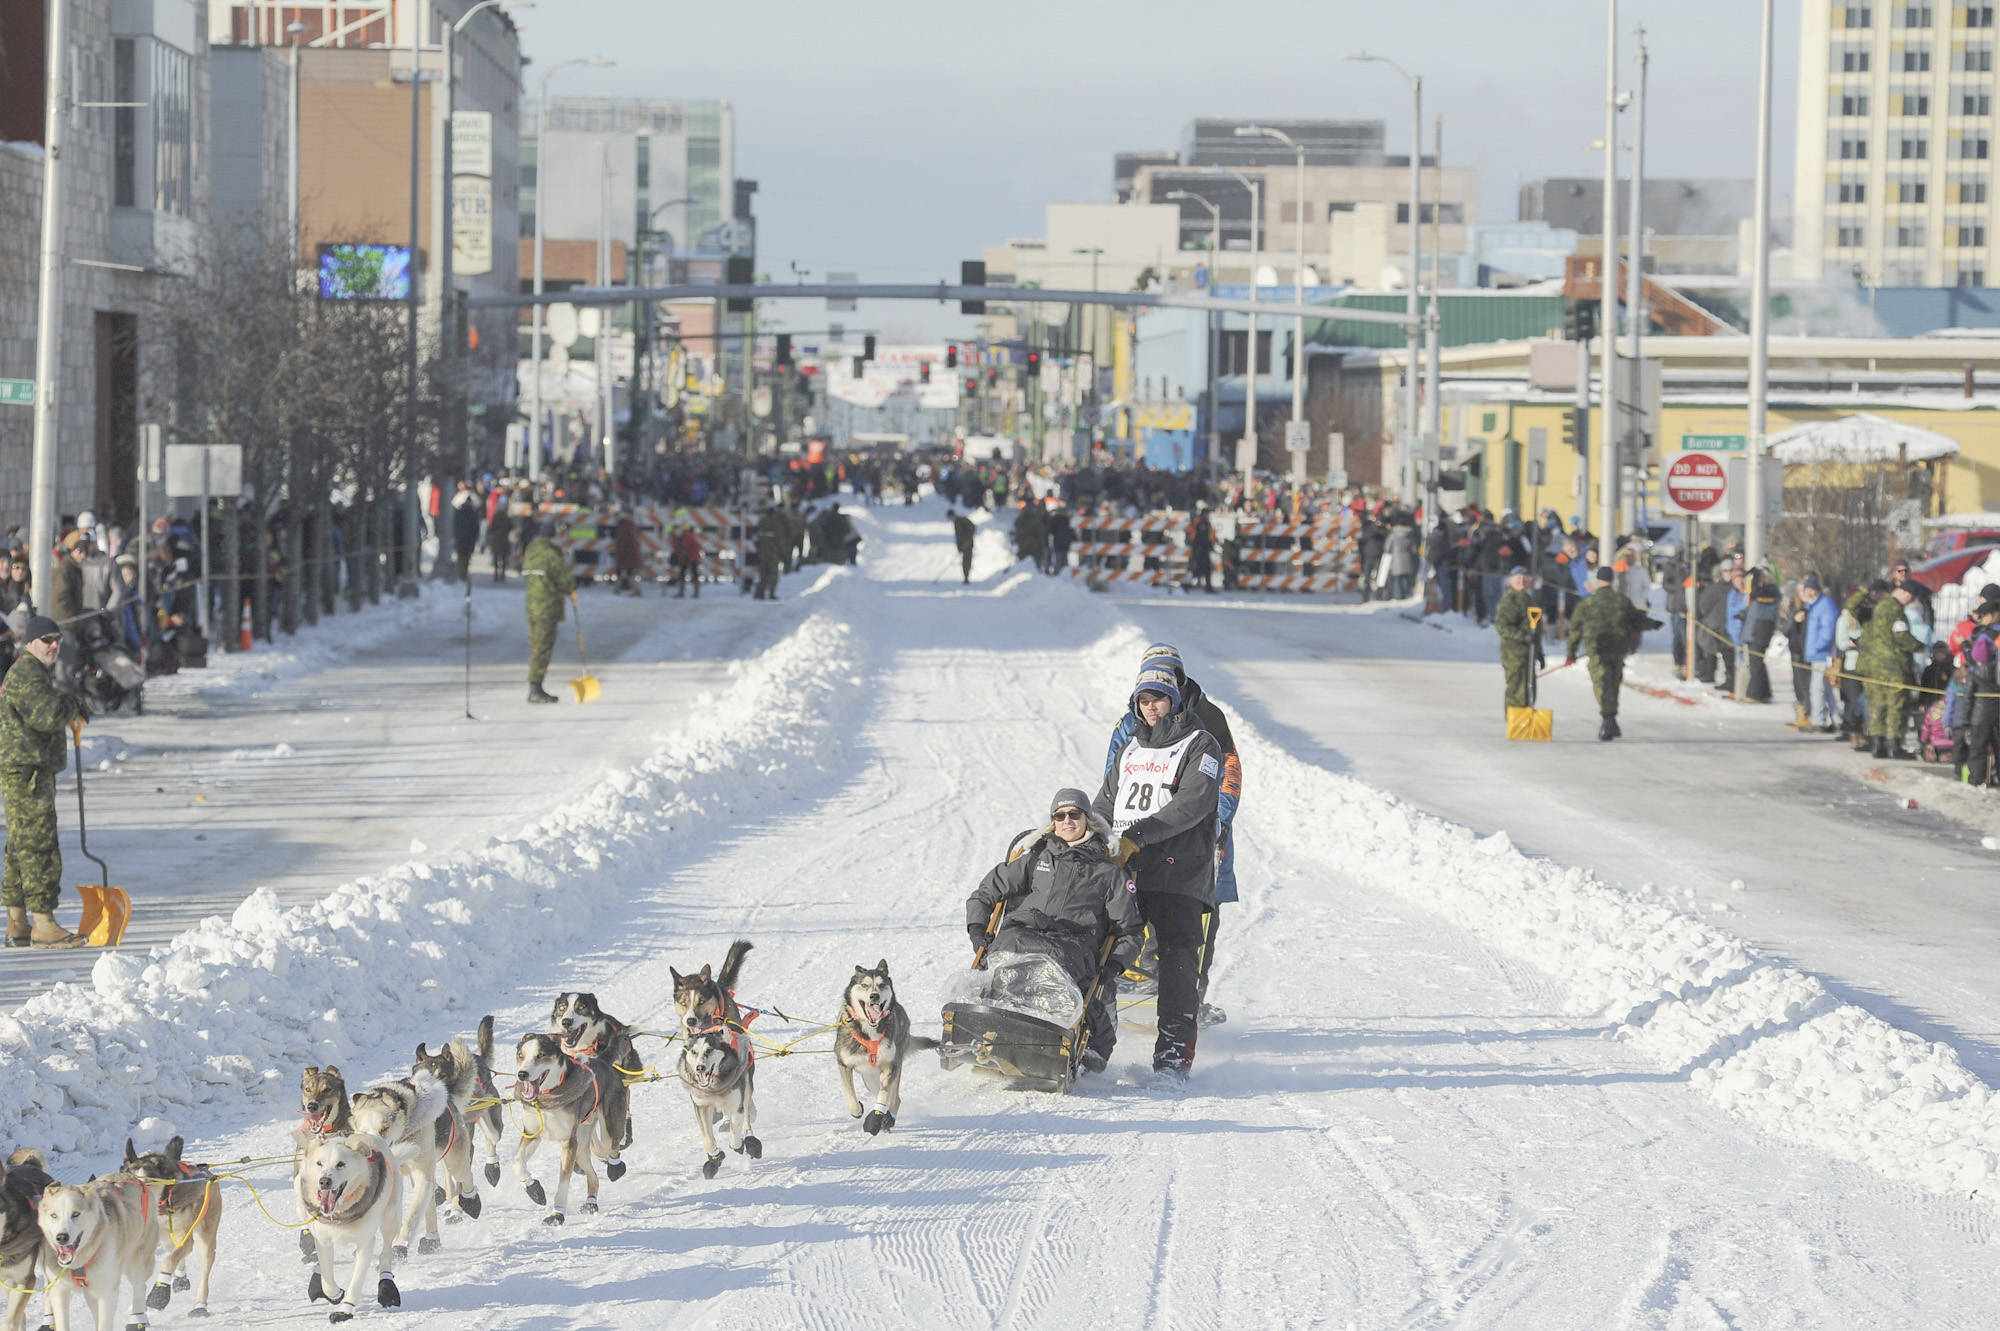 Defending champion Joar Lefseth Ulsom runs his team down Fourth Ave during the ceremonial start of the Iditarod Trail Sled Dog Race Saturday in Anchorage. (AP Photo/Michael Dinneen)